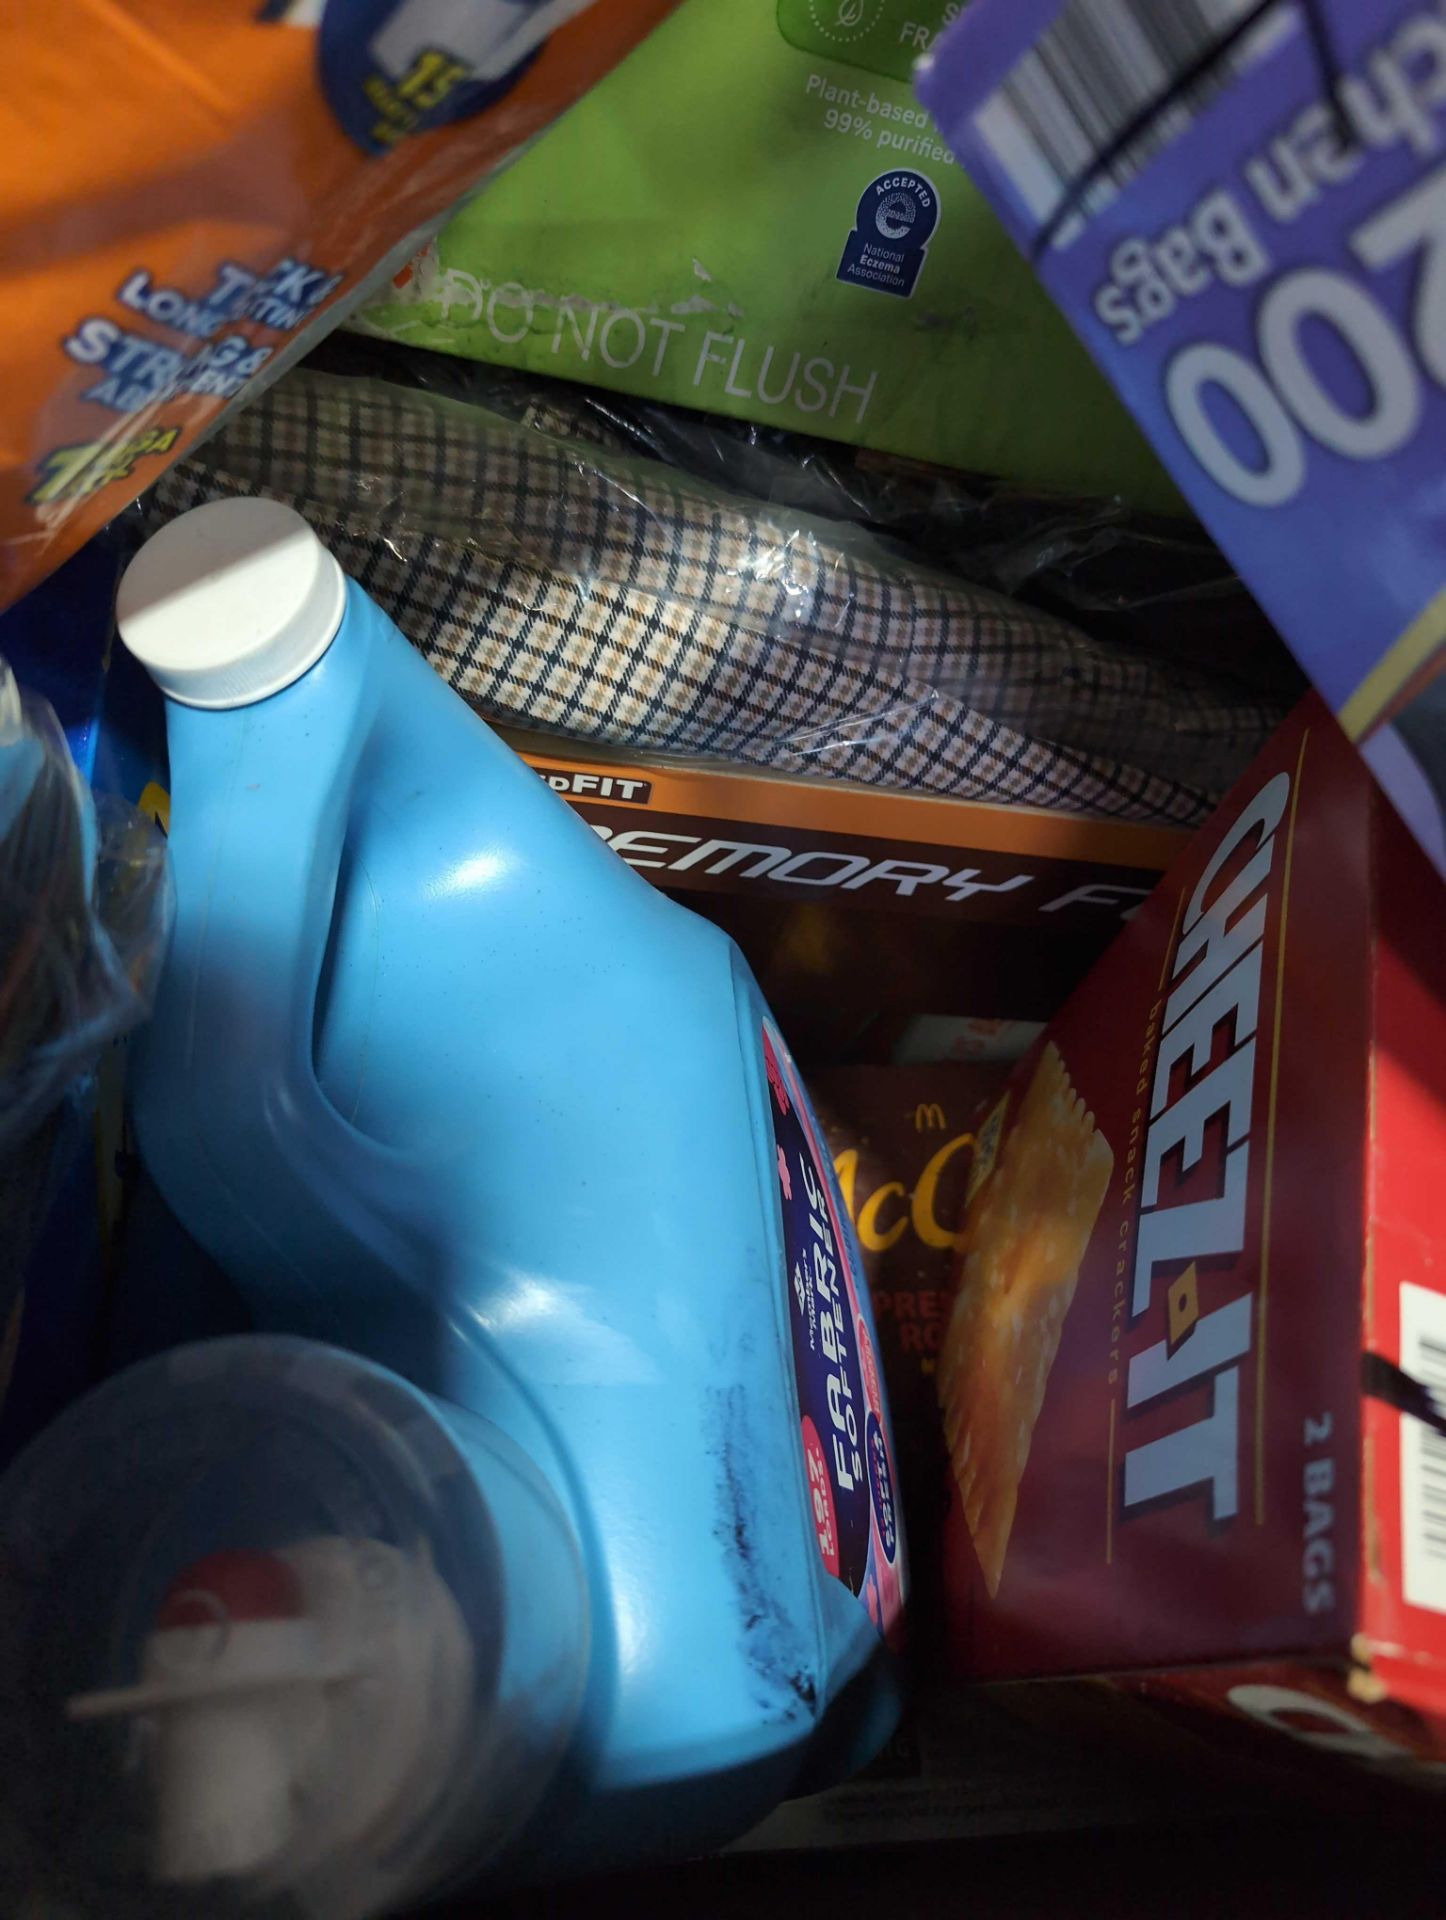 Big box store in a box: Toilet Paper, food containers, Towels, laundry detergent, nacho cheese sauce - Image 12 of 12